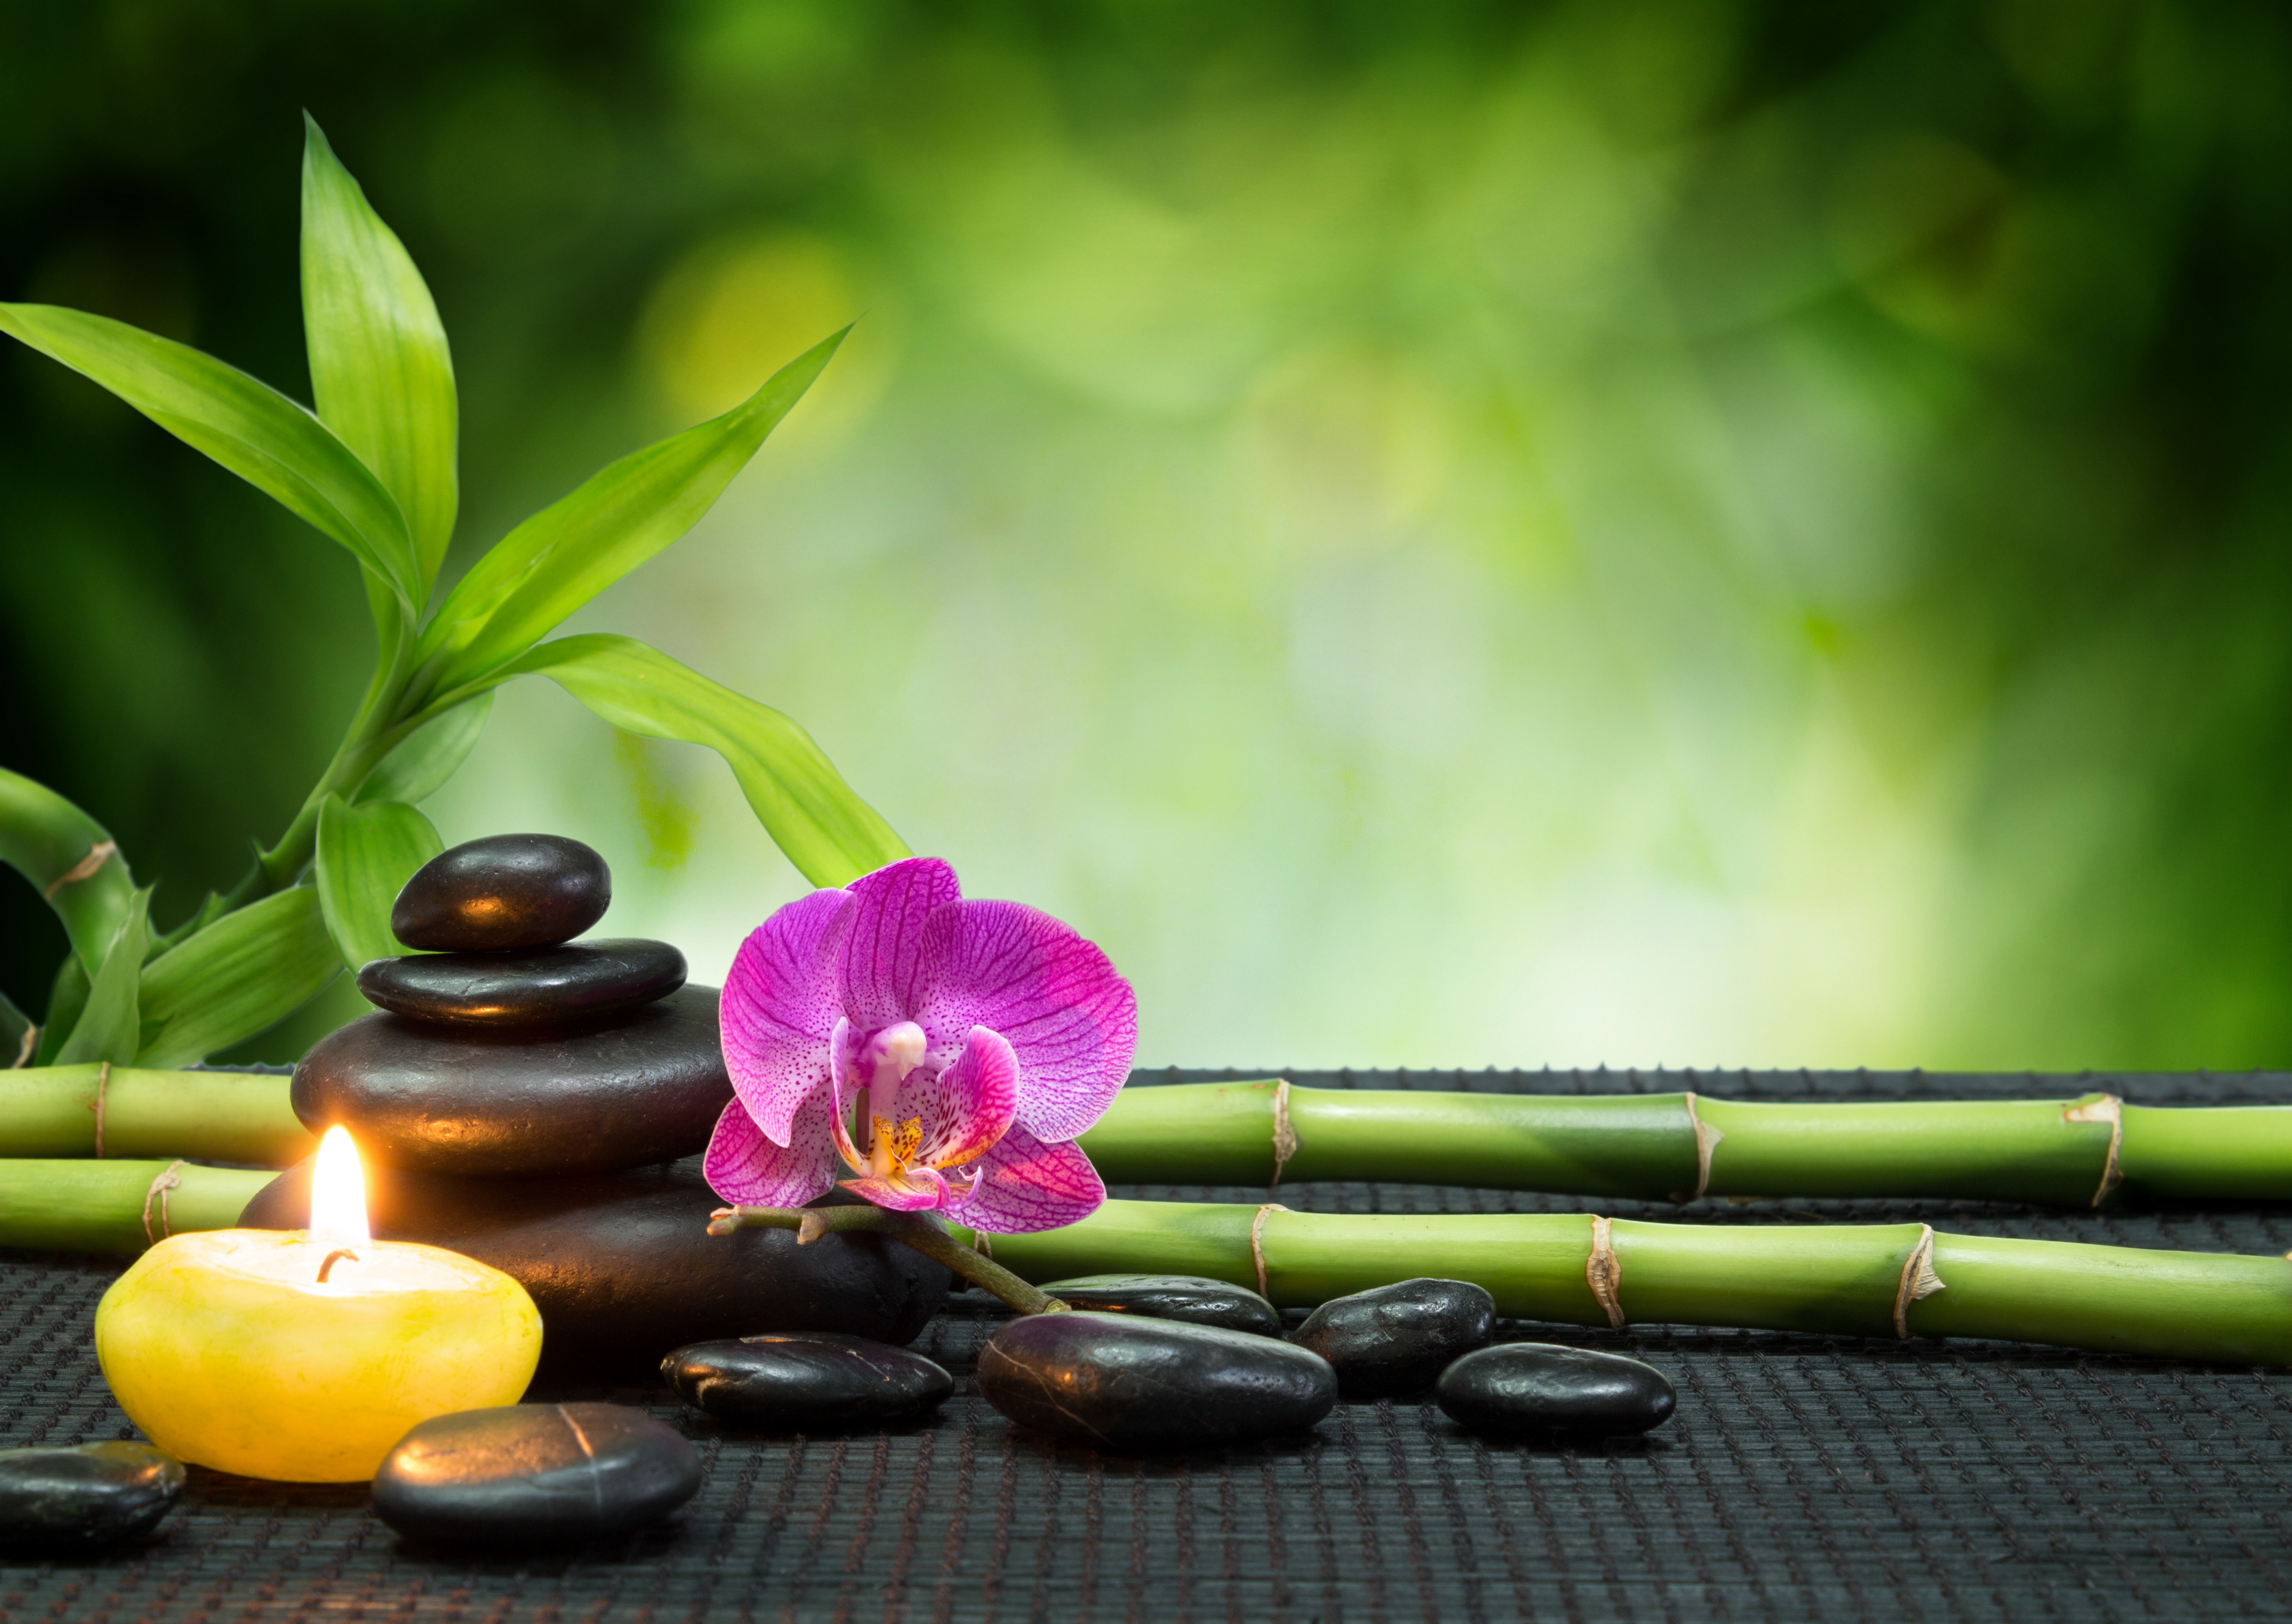 Candle Stones Orchid Bamboo Spa - Zen Hd , HD Wallpaper & Backgrounds